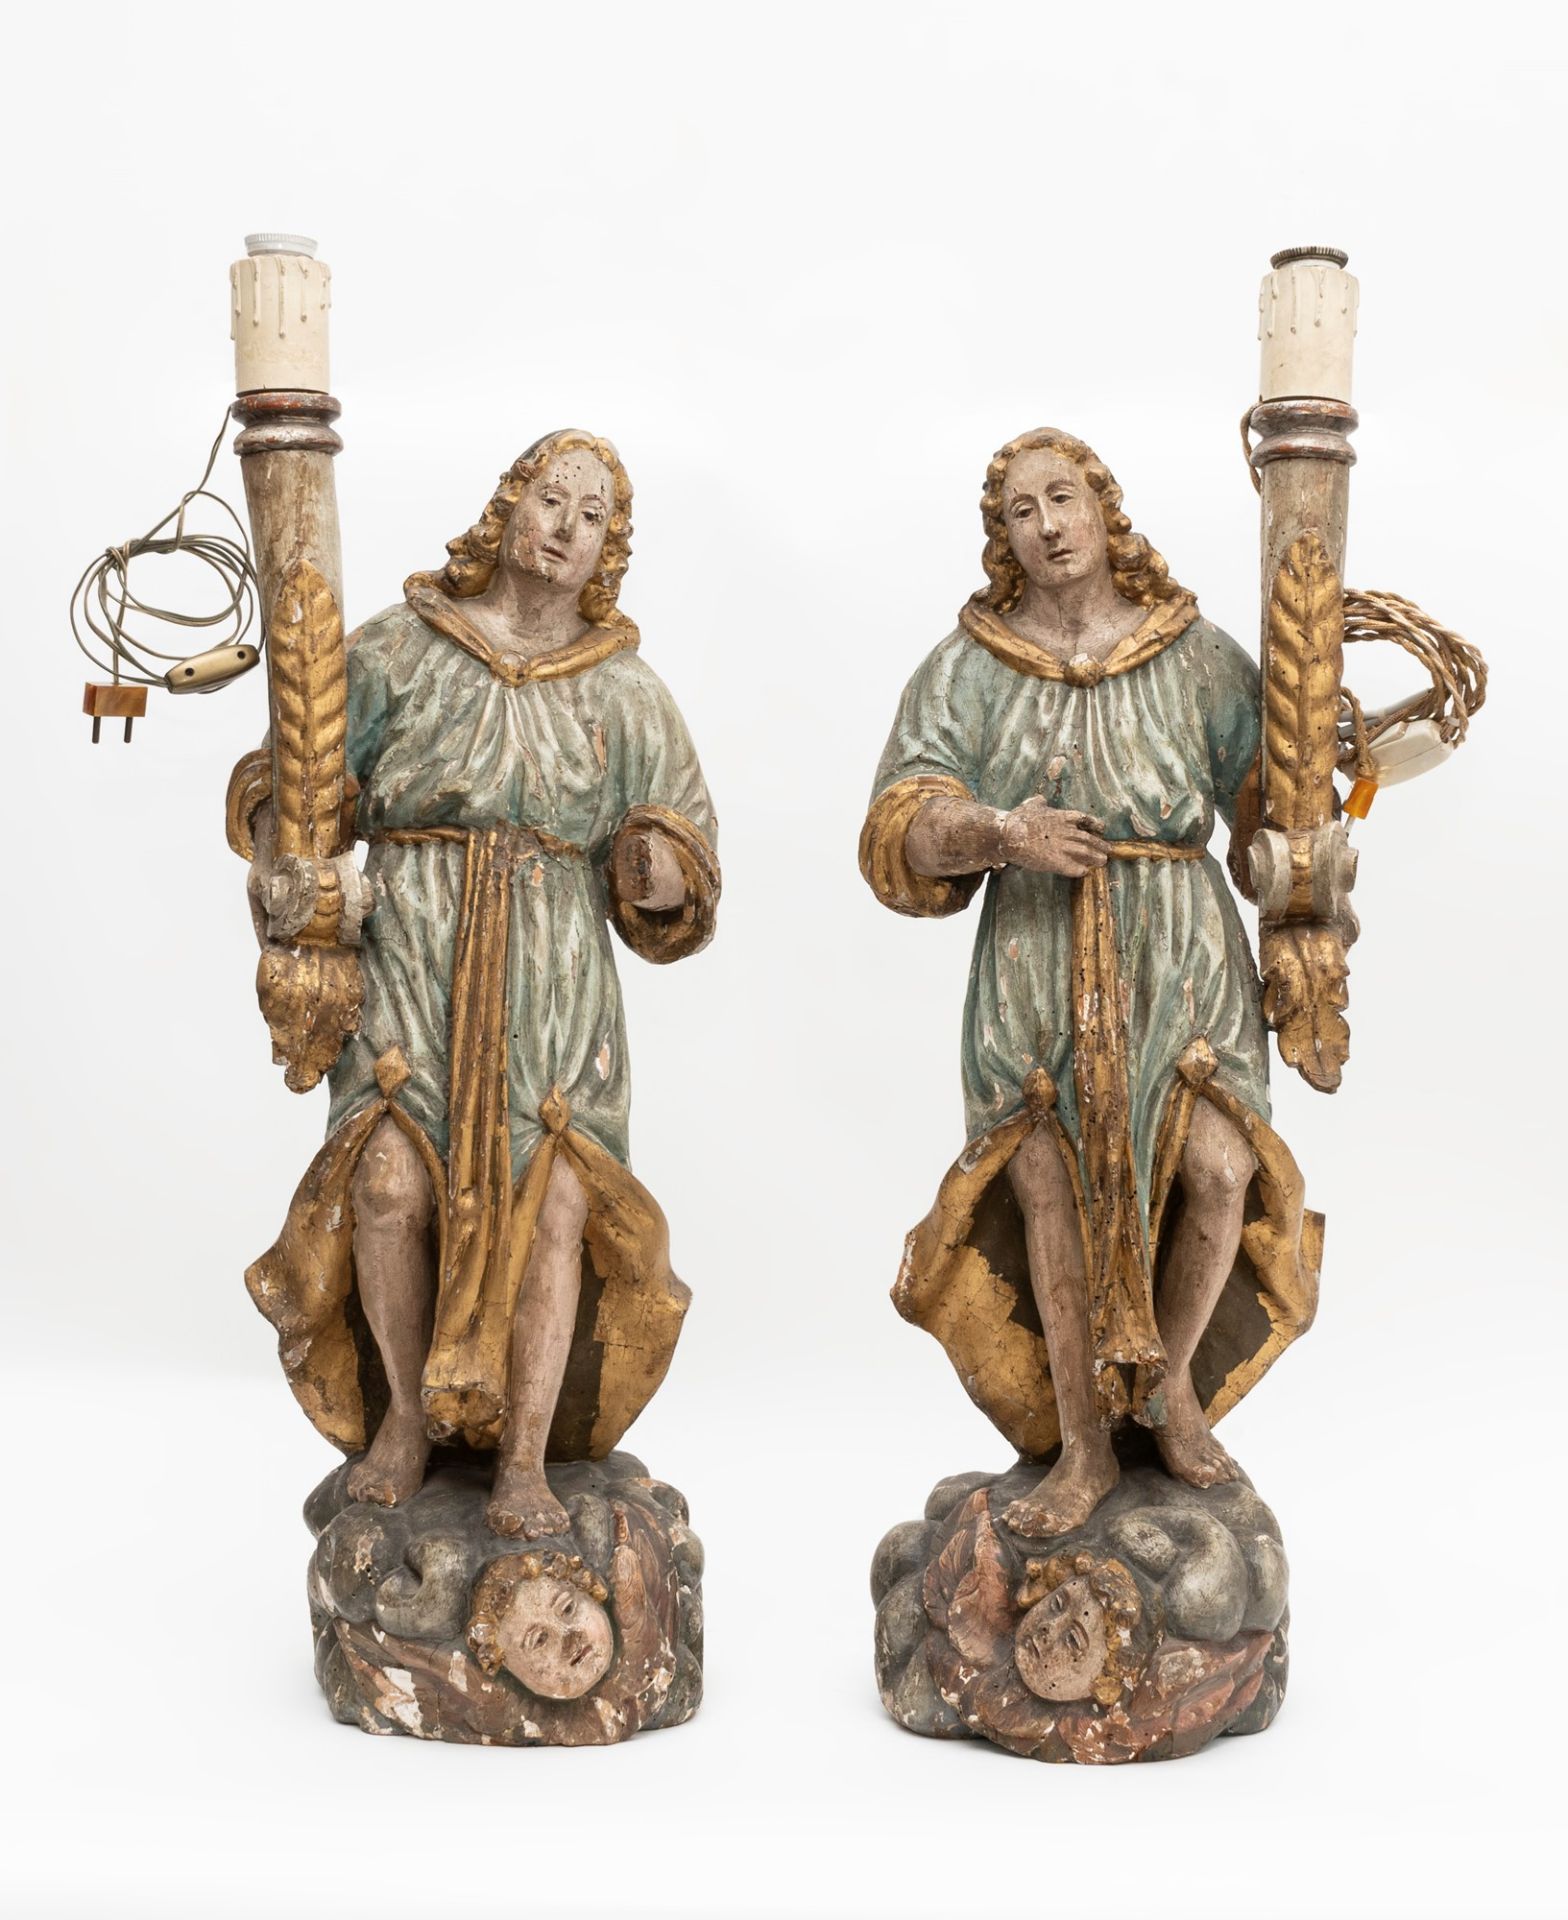 Two carved and lacquered wooden angel-candelabra, 18th century